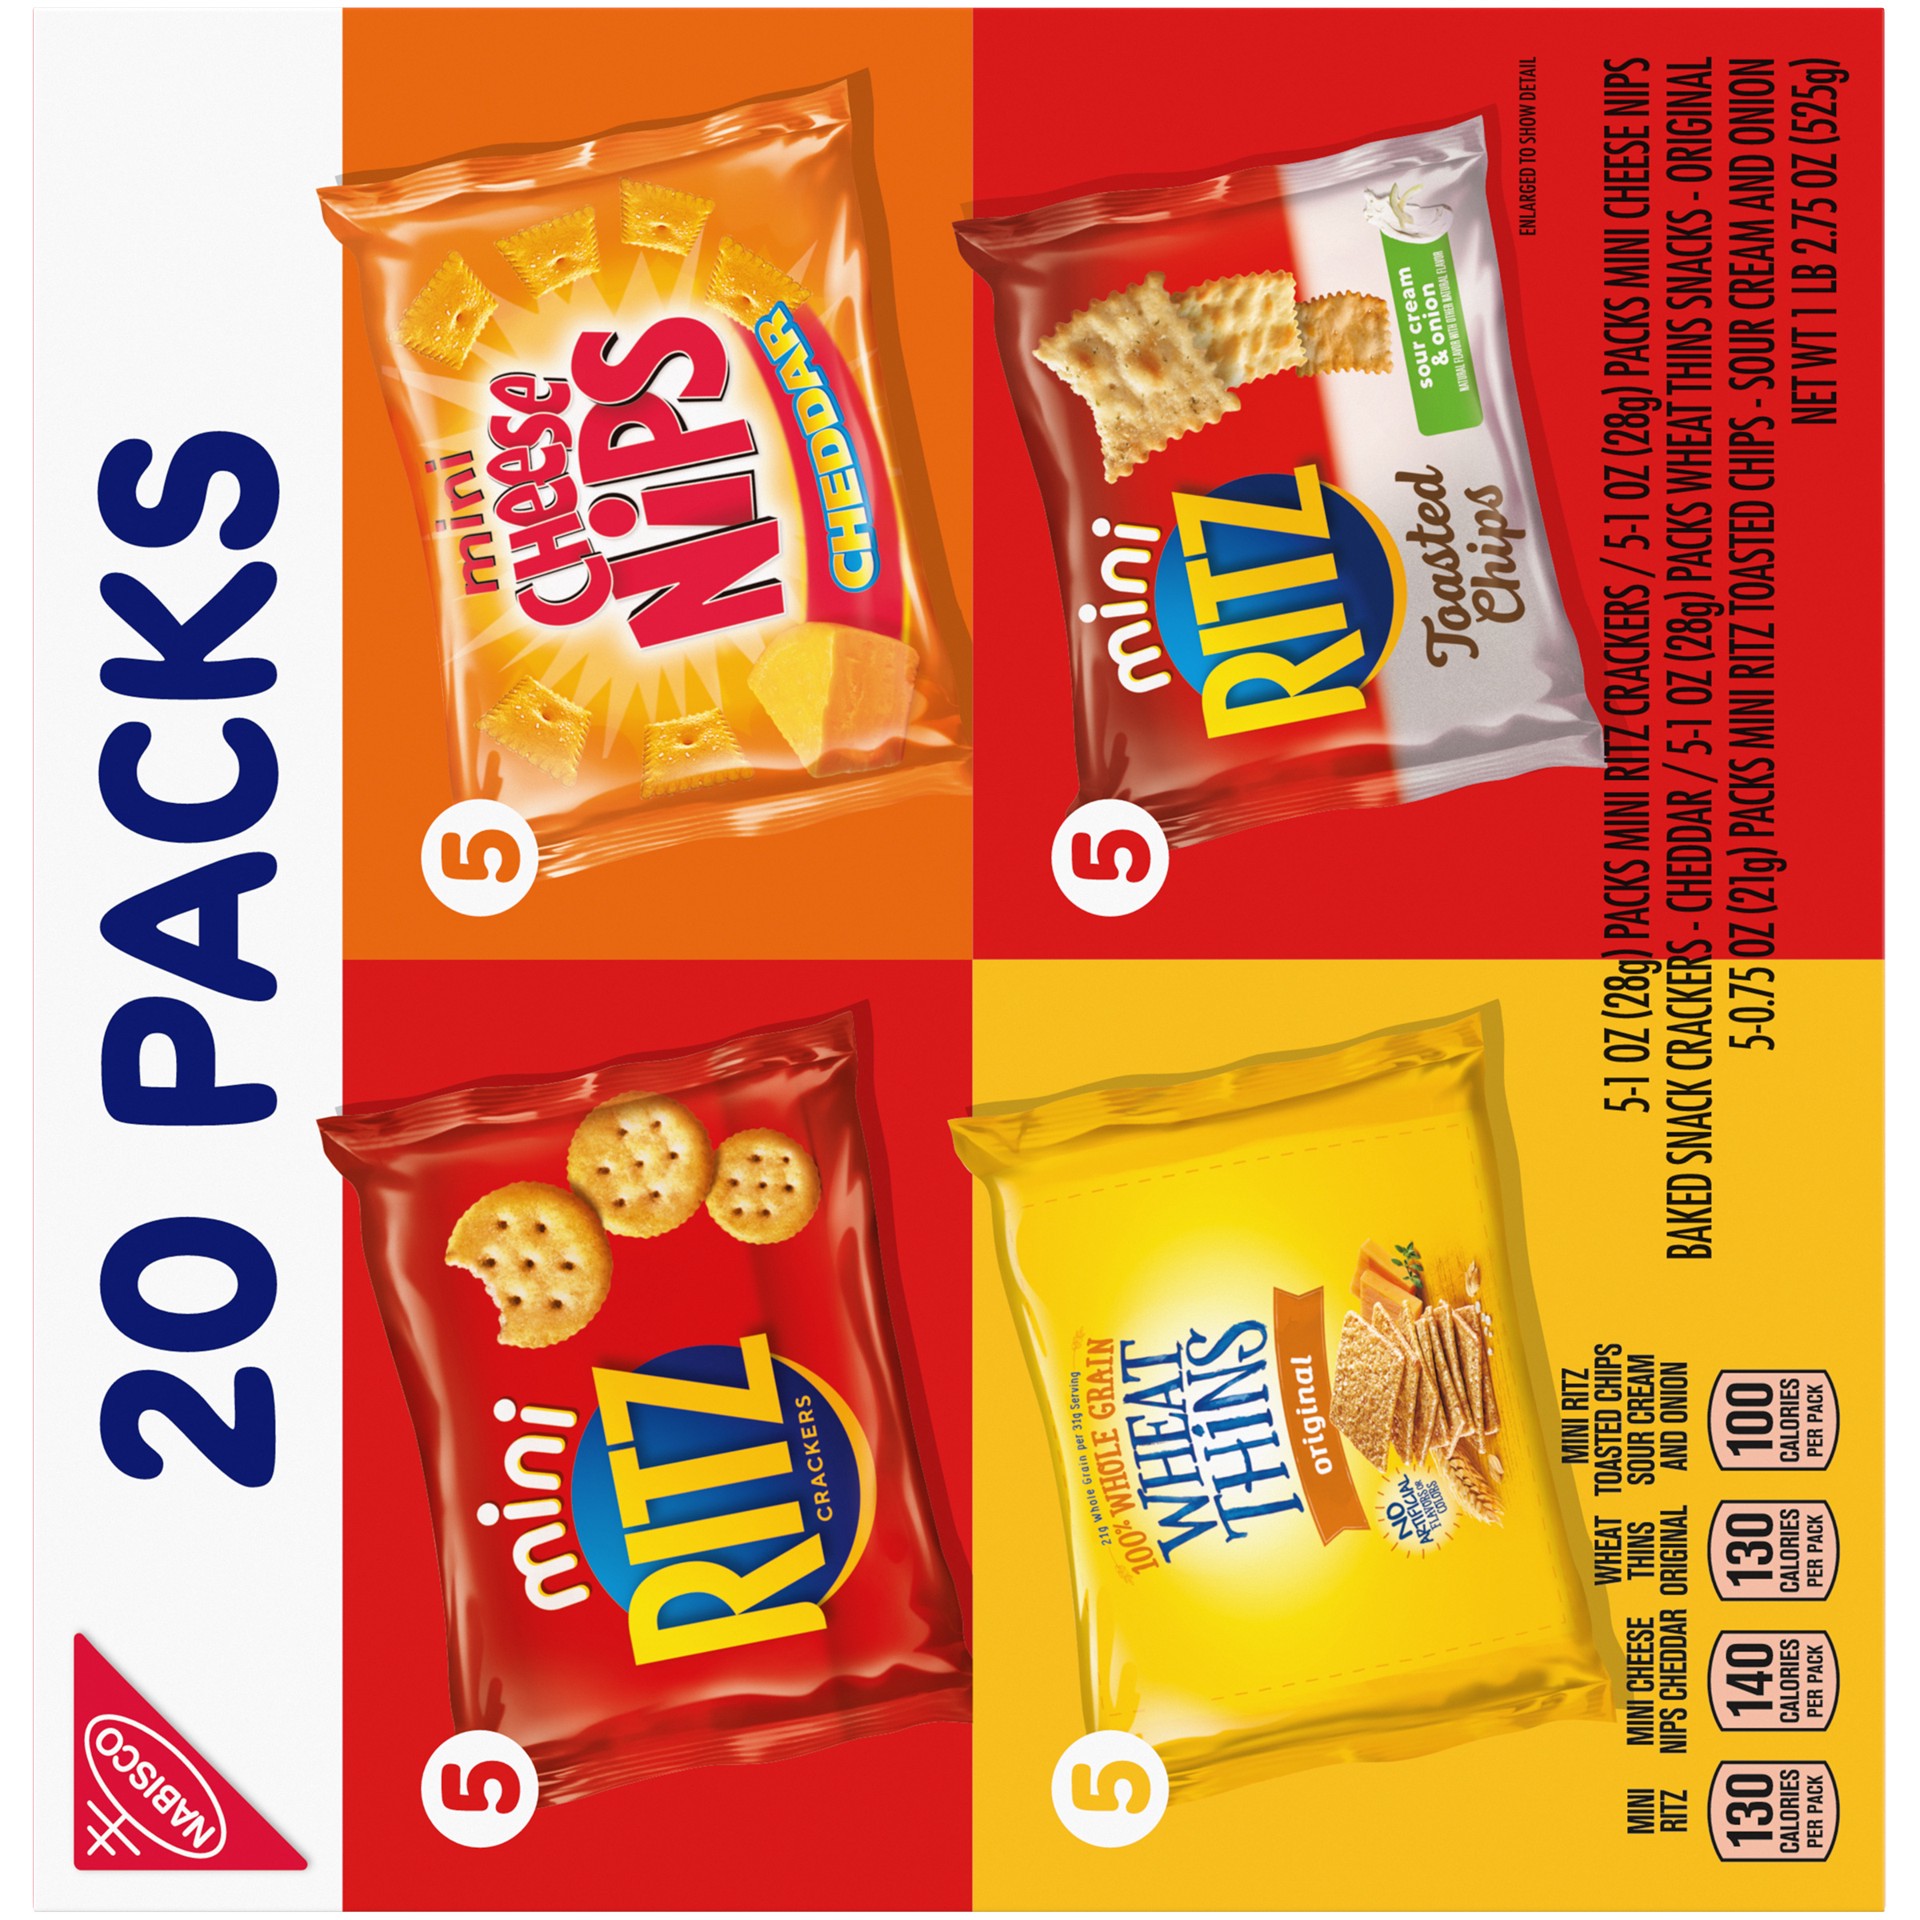 slide 4 of 5, Nabisco Savory Cracker Variety Pack, RITZ, Cheese Nips, Wheat Thins & RITZ Toasted Chips Sour Cream and Onion, 20 Snack Packs, 1.17 lb